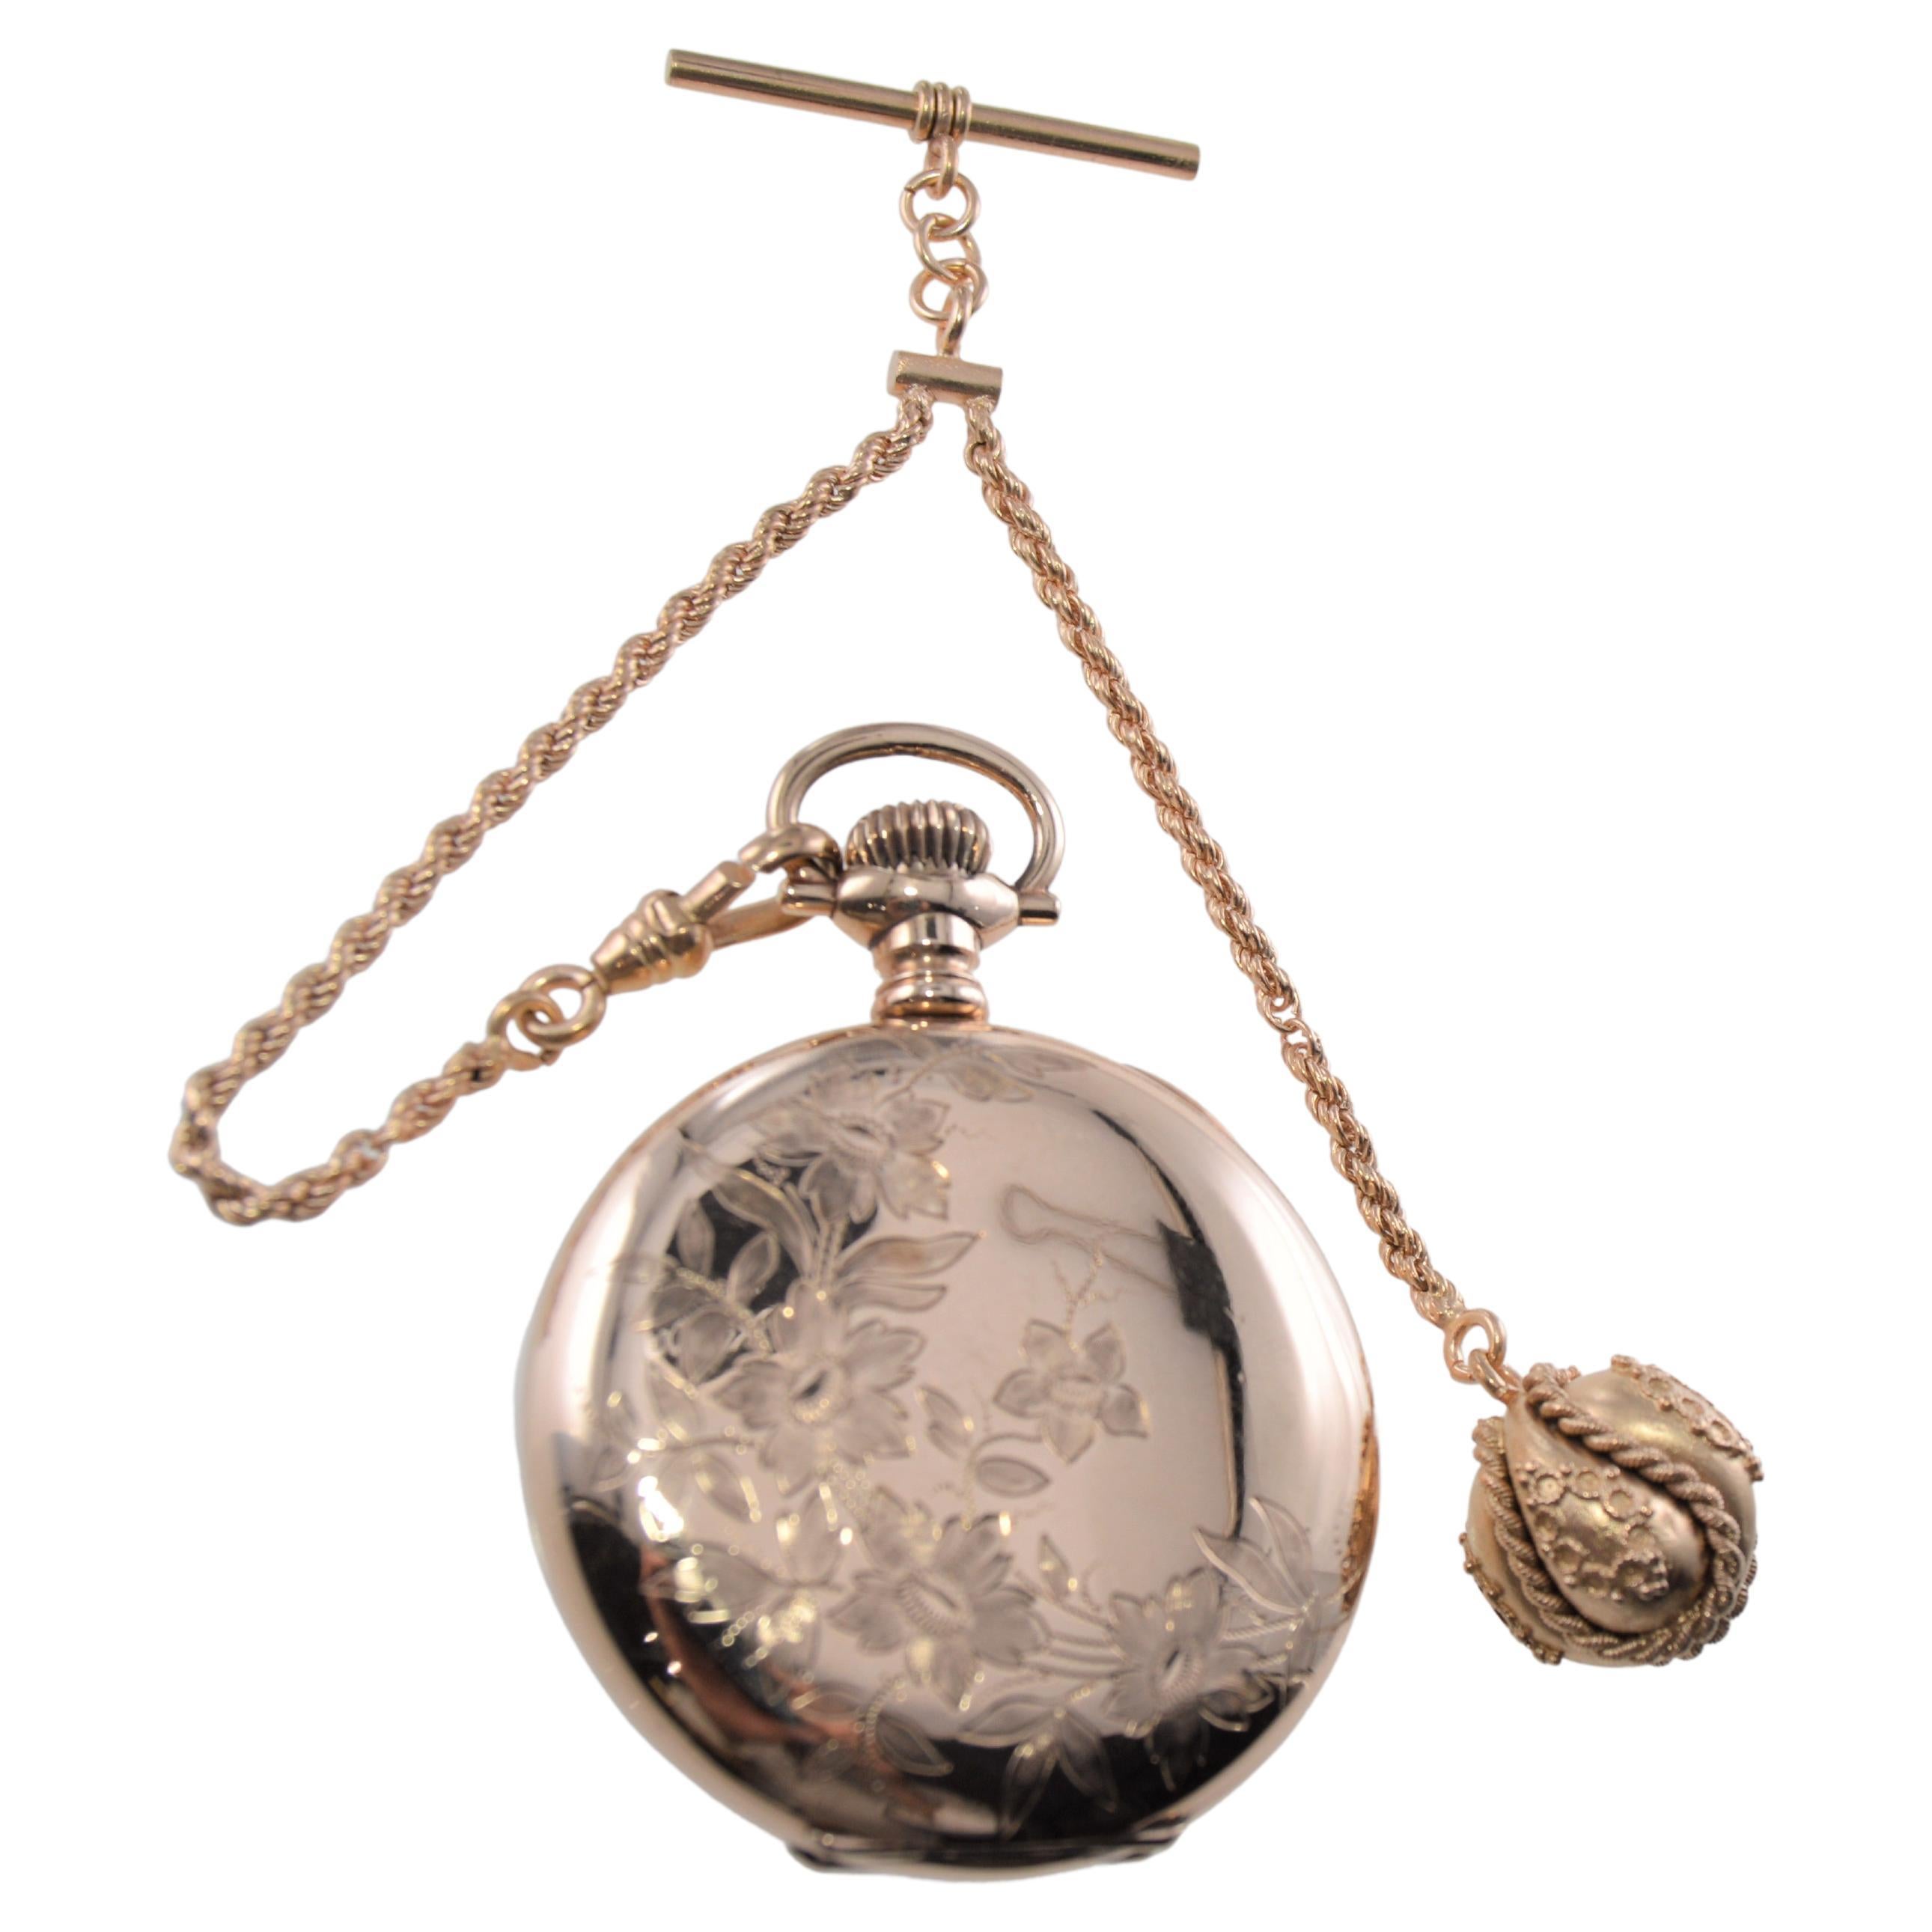 Elgin Gold Filled Pocket Watch with Unique Floral Engraving, circa 1907